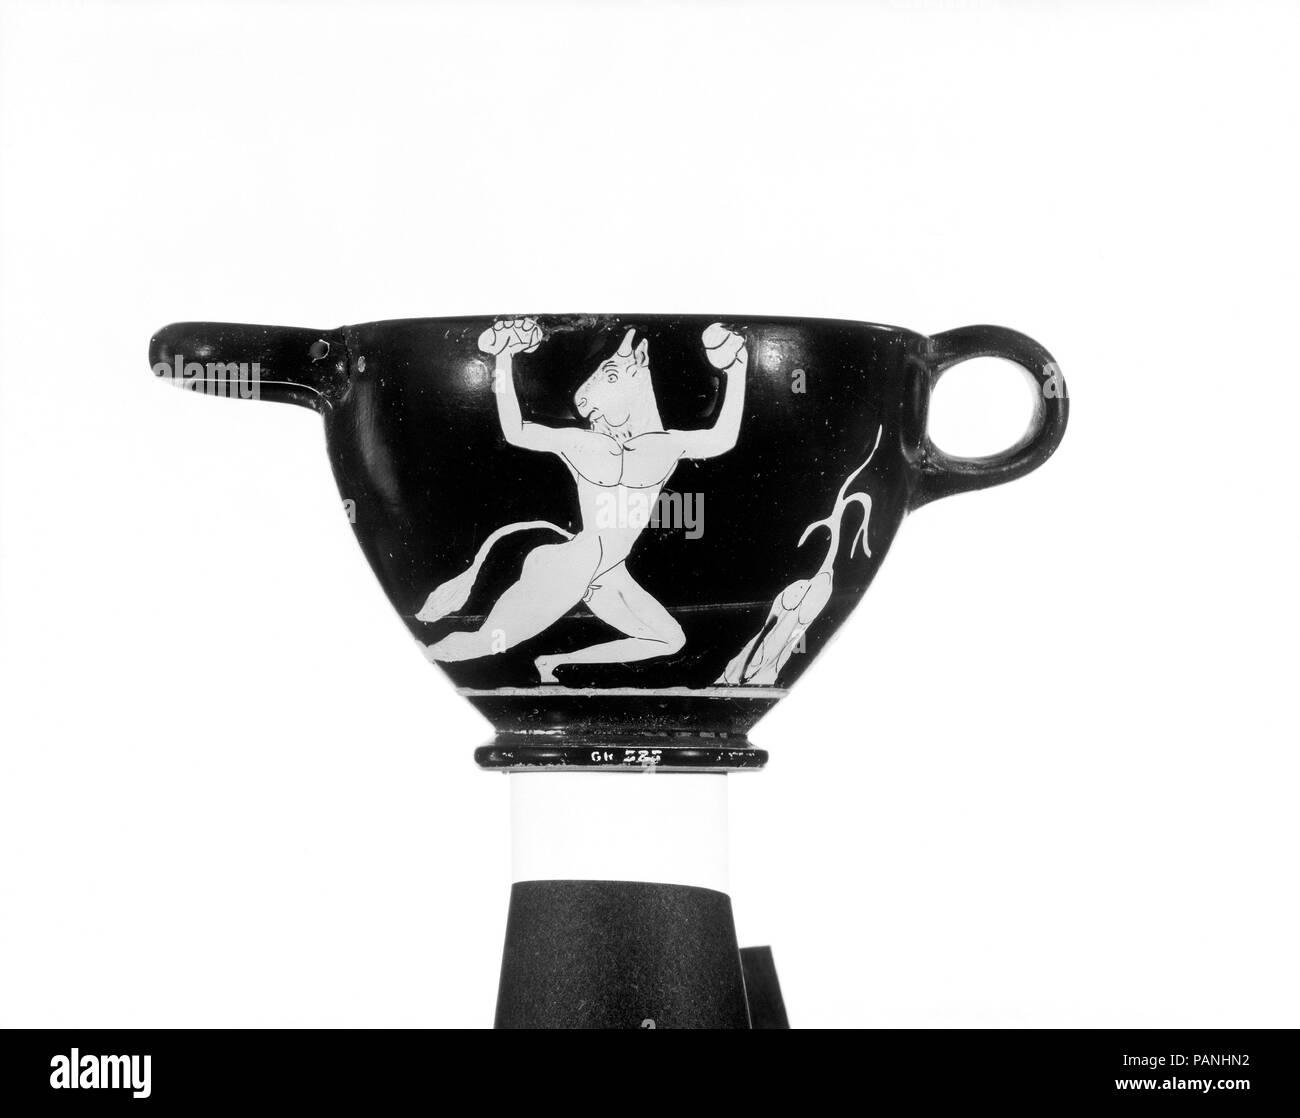 Terracotta skyphos (deep drinking cup). Culture: Greek, Attic. Dimensions: H. 3 1/8 in. (7.9 cm)  diameter  4 1/2 in. (11.4 cm). Date: ca. 470-460 B.C..  Obverse, Theseus  Reverse, the Minotaur  Many red-figure artists eliminated the narrative element from mythological representations and, instead, highlighted the protagonists. Here, with one protagonist on each side, Theseus's pursuit of the Minotaur becomes timeless and eternal. Museum: Metropolitan Museum of Art, New York, USA. Stock Photo